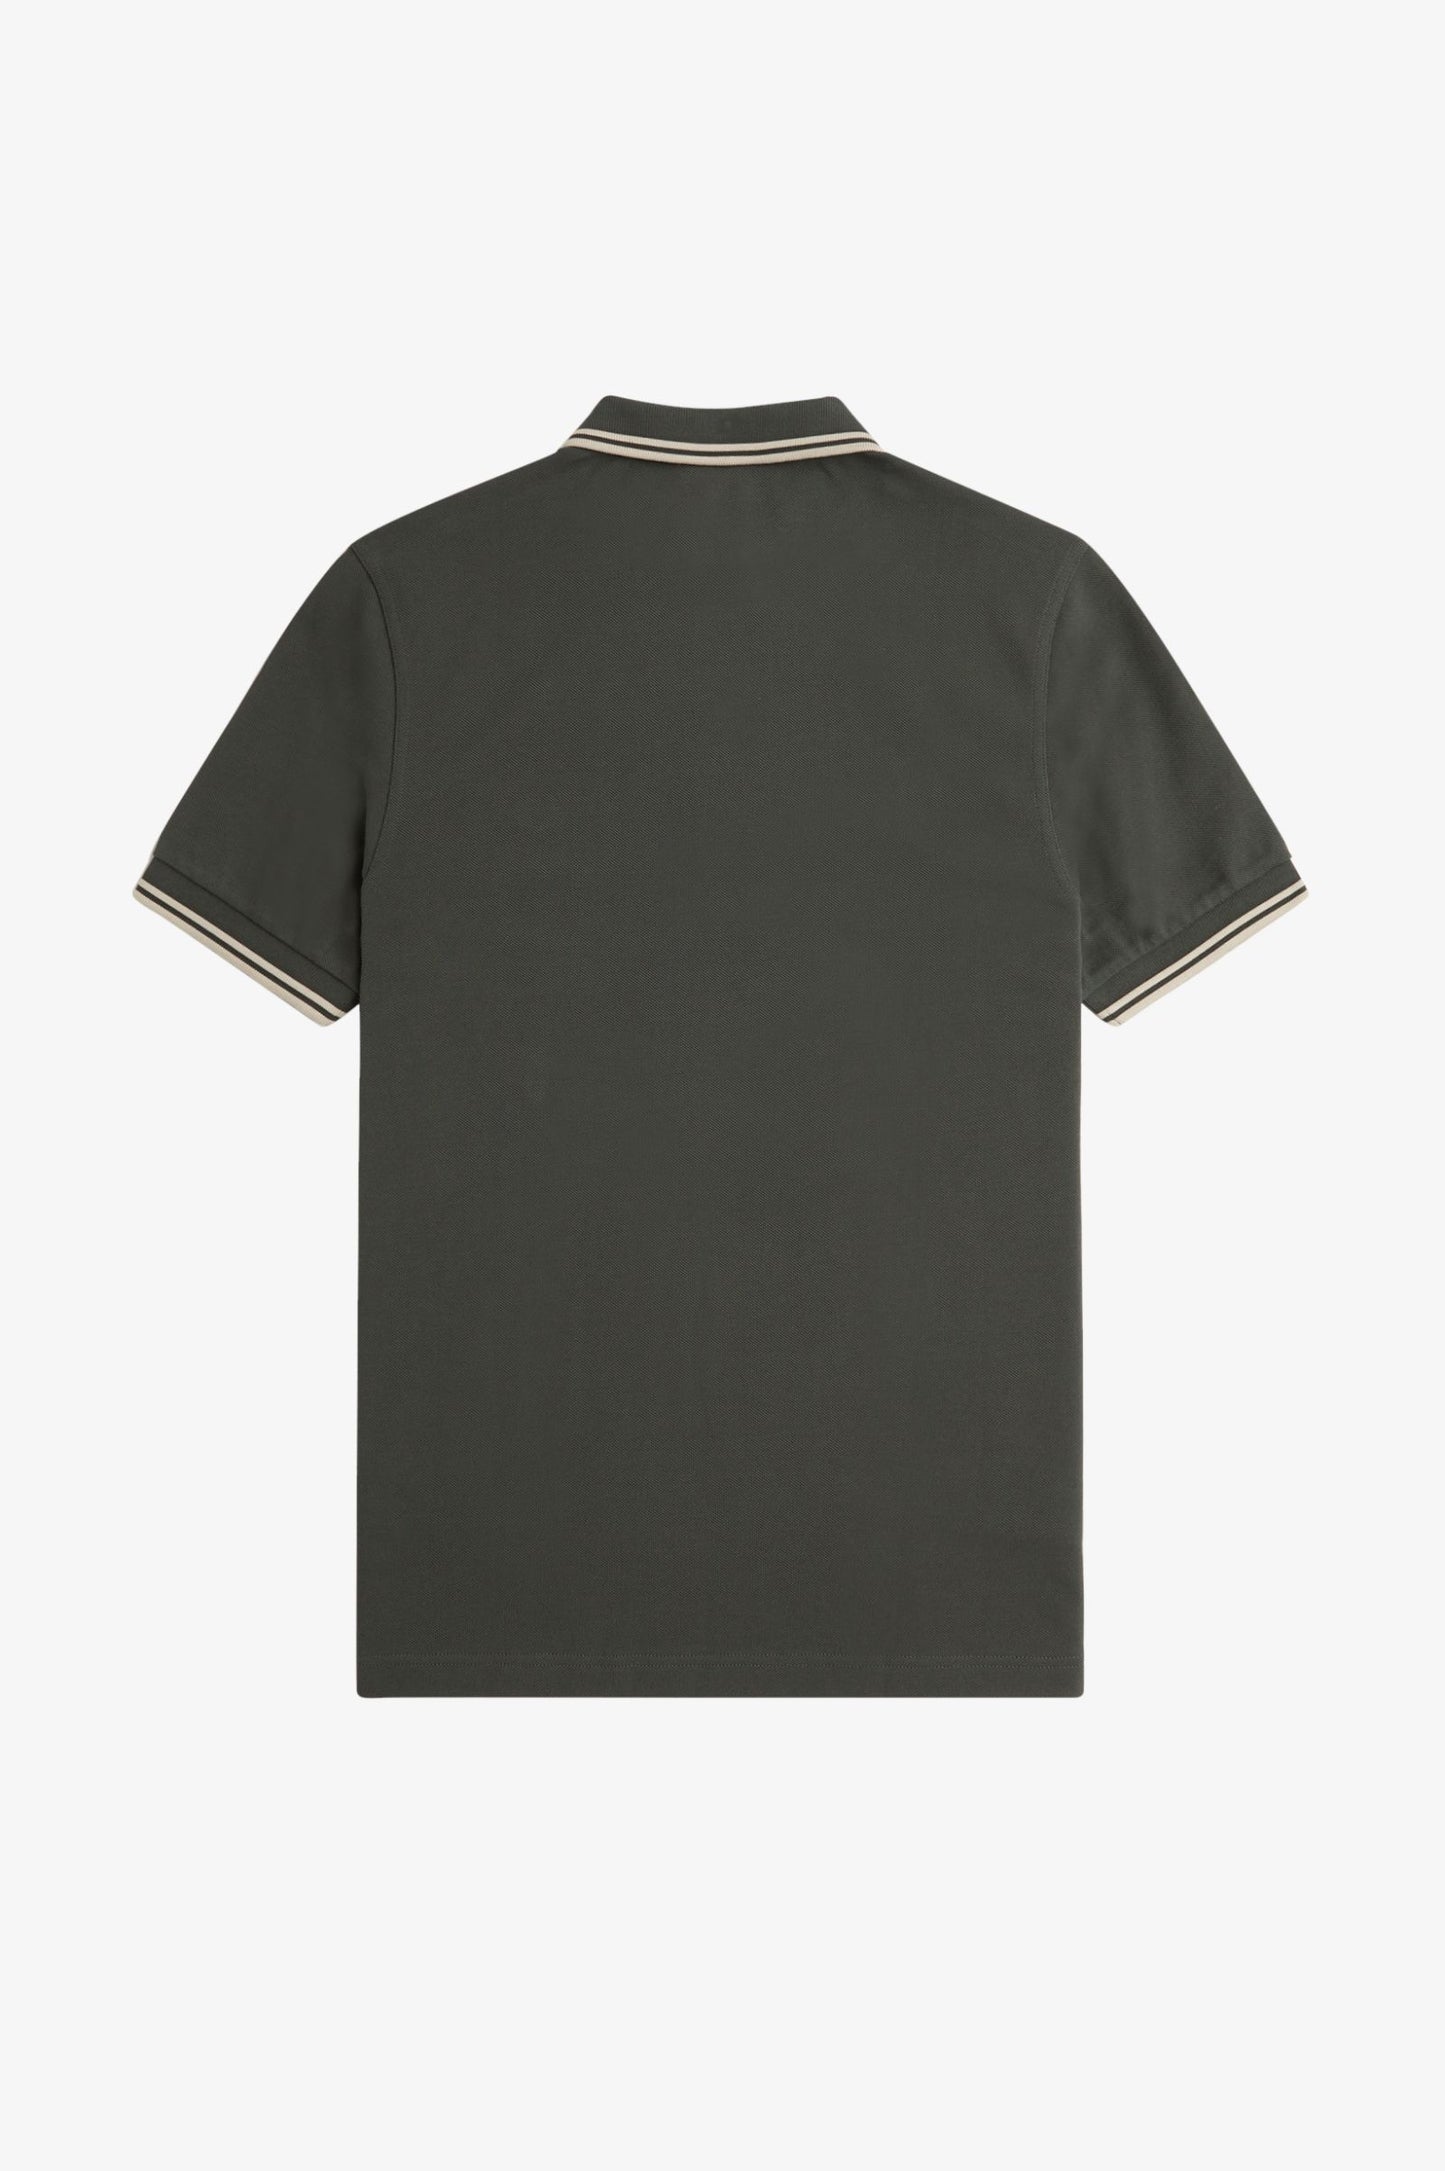 Fred Perry Polo M3600 Fieldgreen / Oatmeal